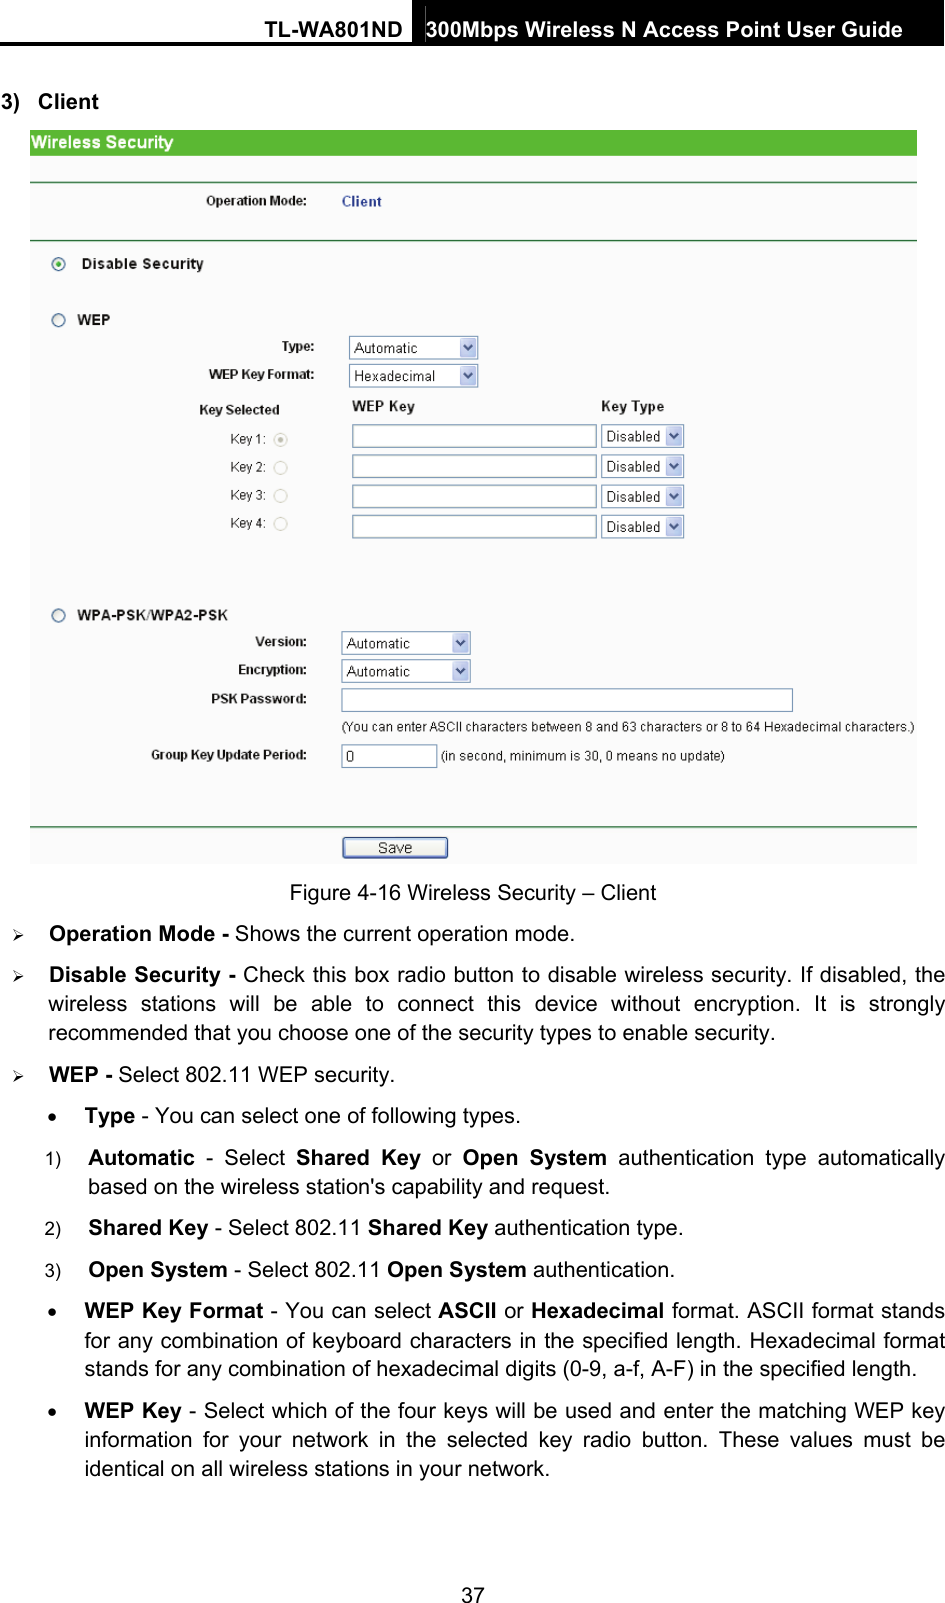 TL-WA801ND 300Mbps Wireless N Access Point User Guide  37 3) Client  Figure 4-16 Wireless Security – Client ¾ Operation Mode - Shows the current operation mode.   ¾ Disable Security - Check this box radio button to disable wireless security. If disabled, the wireless stations will be able to connect this device without encryption. It is strongly recommended that you choose one of the security types to enable security.   ¾ WEP - Select 802.11 WEP security.   • Type - You can select one of following types. 1)  Automatic - Select Shared Key or Open System authentication type automatically based on the wireless station&apos;s capability and request.   2)  Shared Key - Select 802.11 Shared Key authentication type.   3)  Open System - Select 802.11 Open System authentication.   • WEP Key Format - You can select ASCII or Hexadecimal format. ASCII format stands for any combination of keyboard characters in the specified length. Hexadecimal format stands for any combination of hexadecimal digits (0-9, a-f, A-F) in the specified length. • WEP Key - Select which of the four keys will be used and enter the matching WEP key information for your network in the selected key radio button. These values must be identical on all wireless stations in your network.   